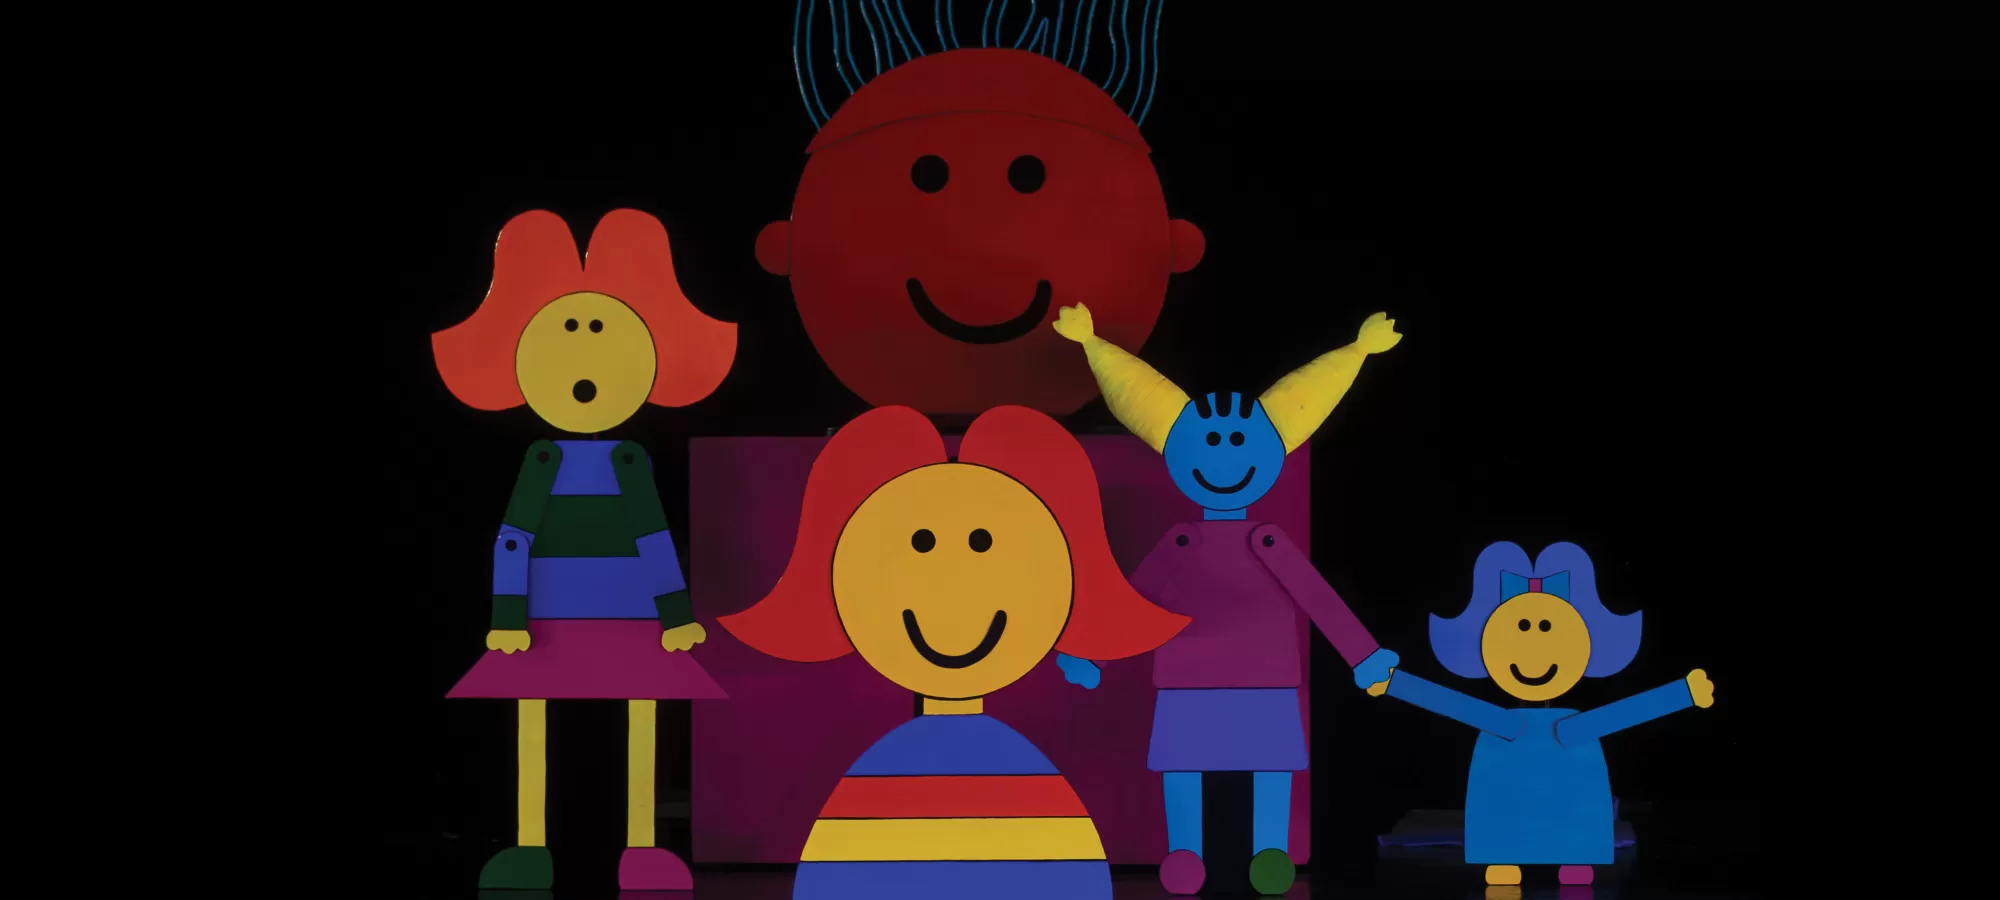 IT’S OKAY TO BE DIFFERENT - STORIES BY TODD PARR